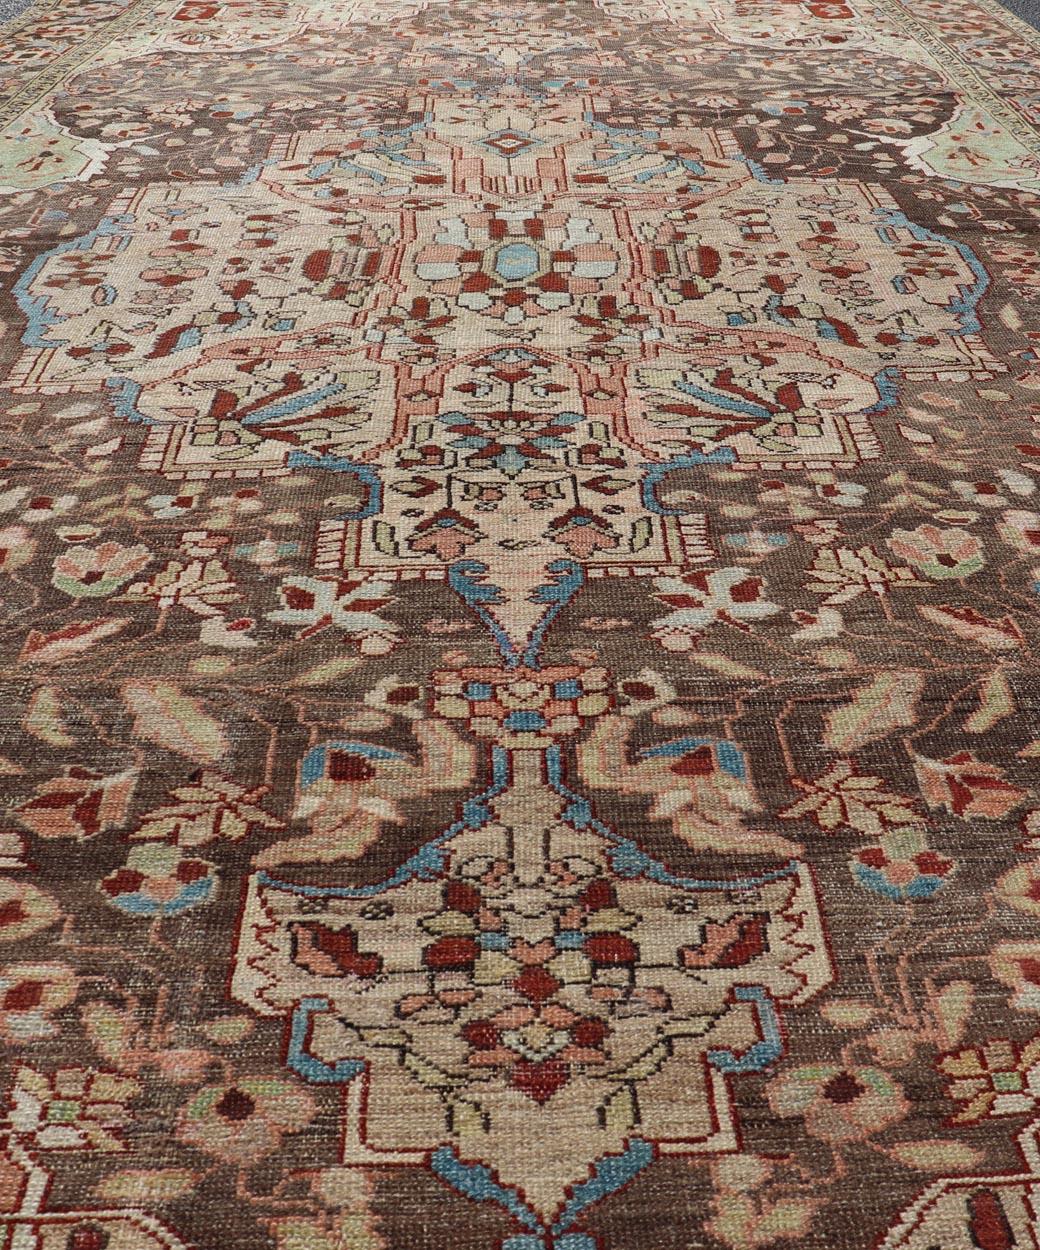 Antique Persian Malayer Gallery Rug with Large Floral Medallion With Soft Colors. Keivan Woven Arts / rug W22-0402-15478, country of origin / type: Iran / Malayer, circa 1920.
Measures: 6'8 x 12'9 
This multicolored Antique Persian Malayer wide